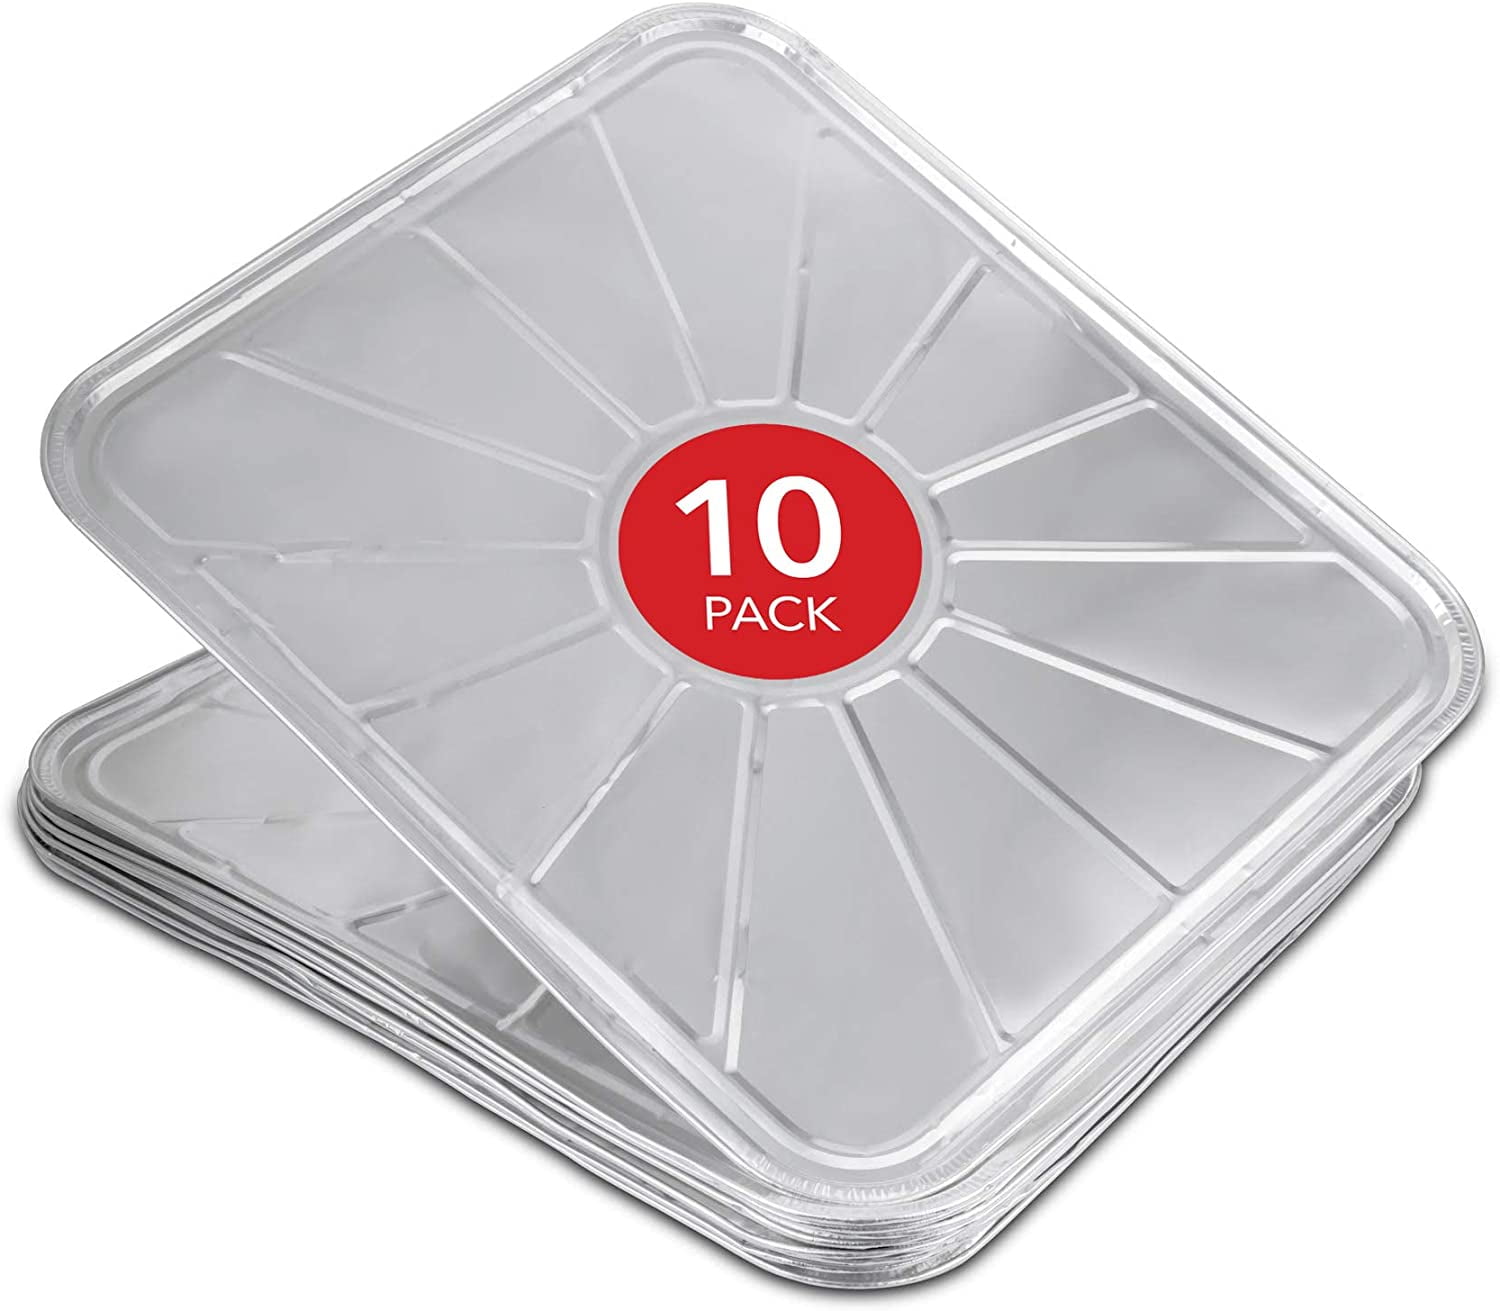 Disposable Foil Bucket Liners - 6 Pack – Louisiana-Grills